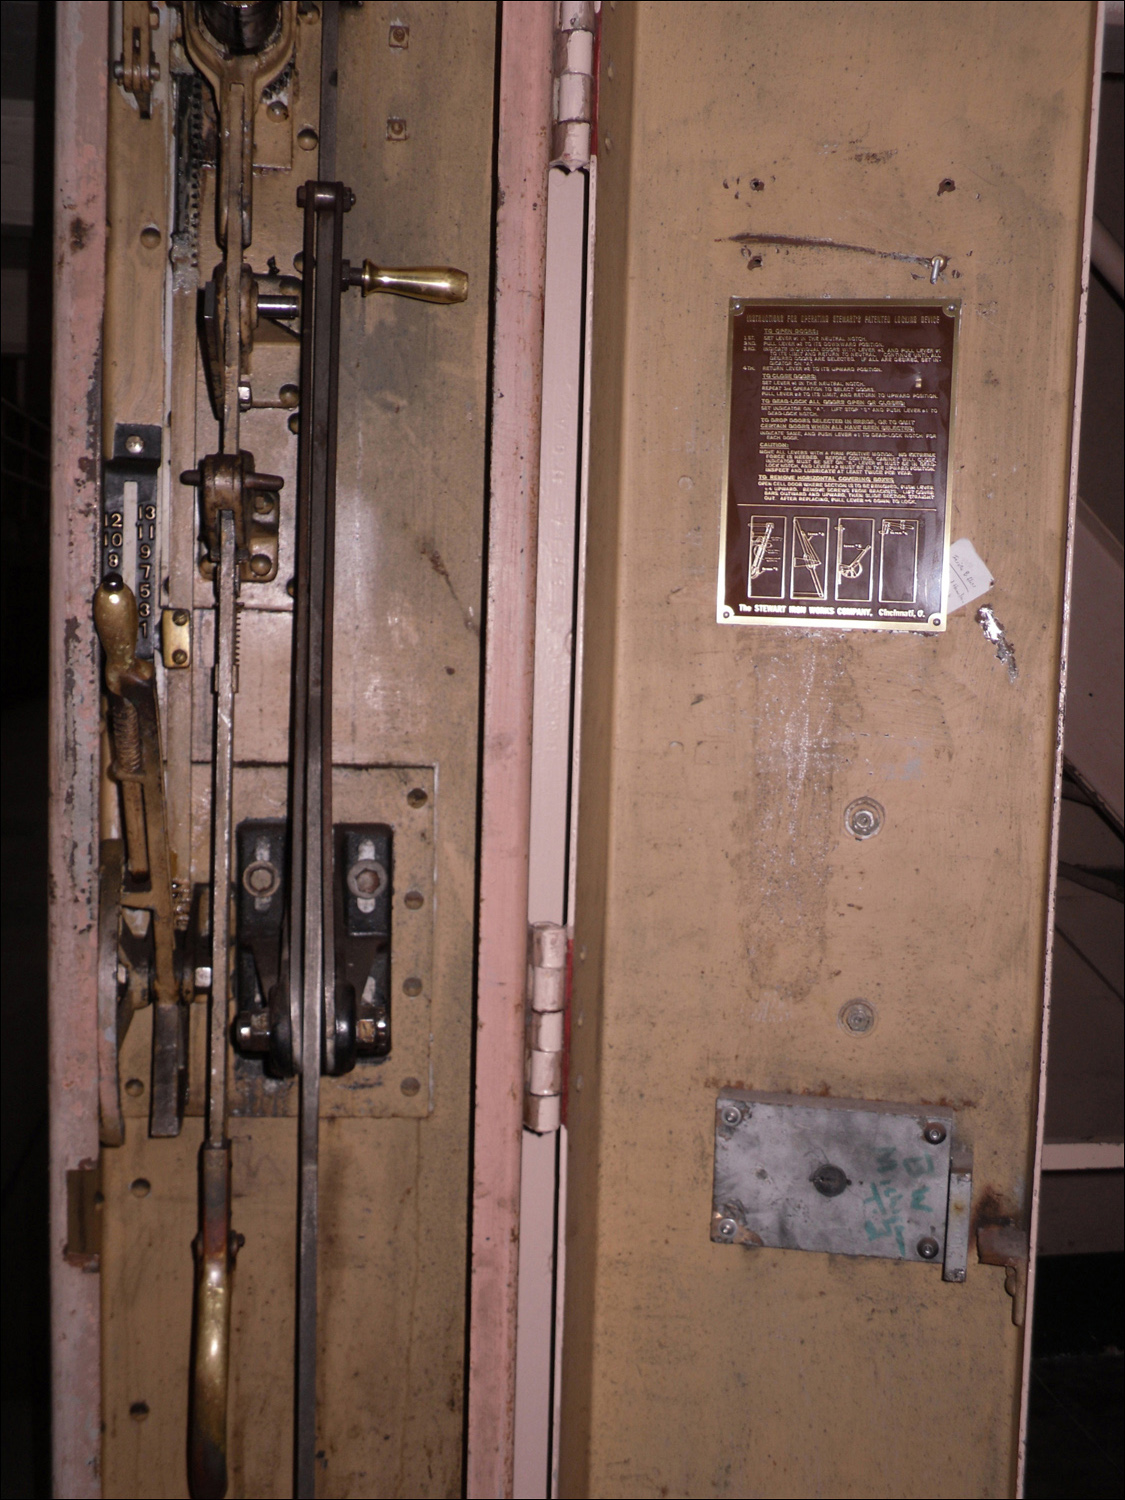 Controls to operate cell block doors